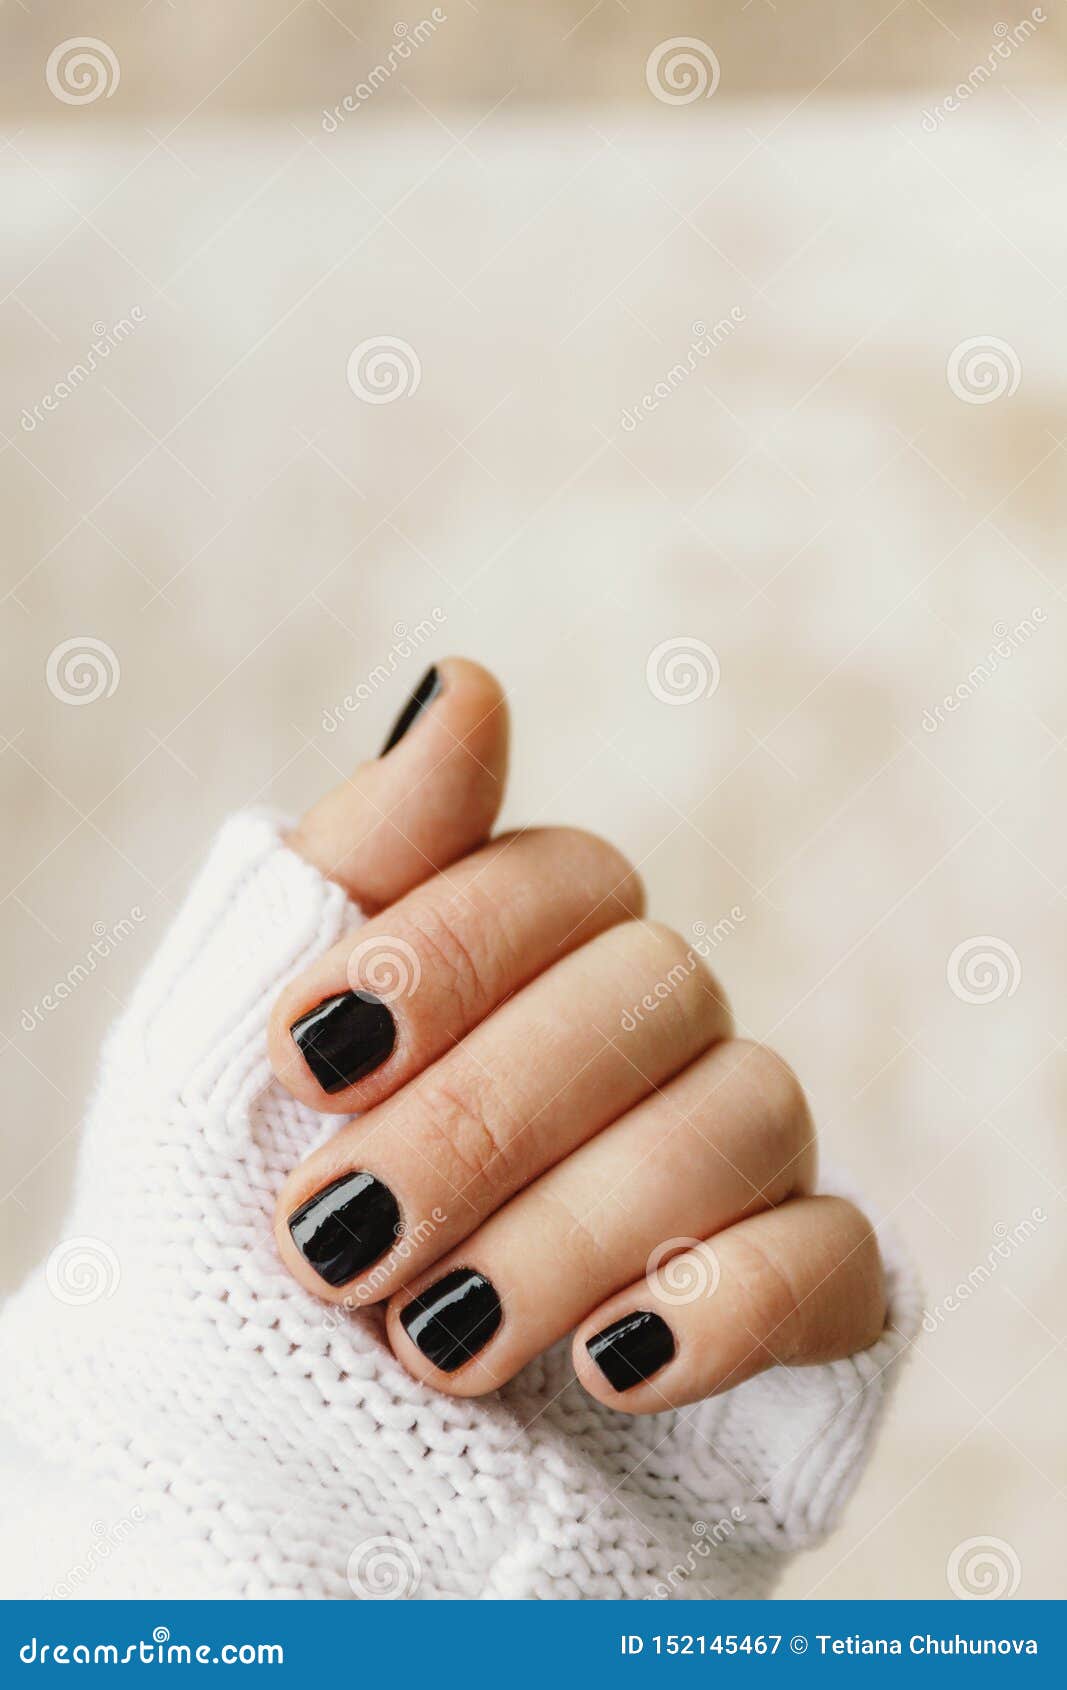 Hand with Black Manicure on Short Nails in a White Sweater on a Light  Background. the Concept of a Stylish and Warm Winter Stock Image - Image of  isolated, decals: 152145467